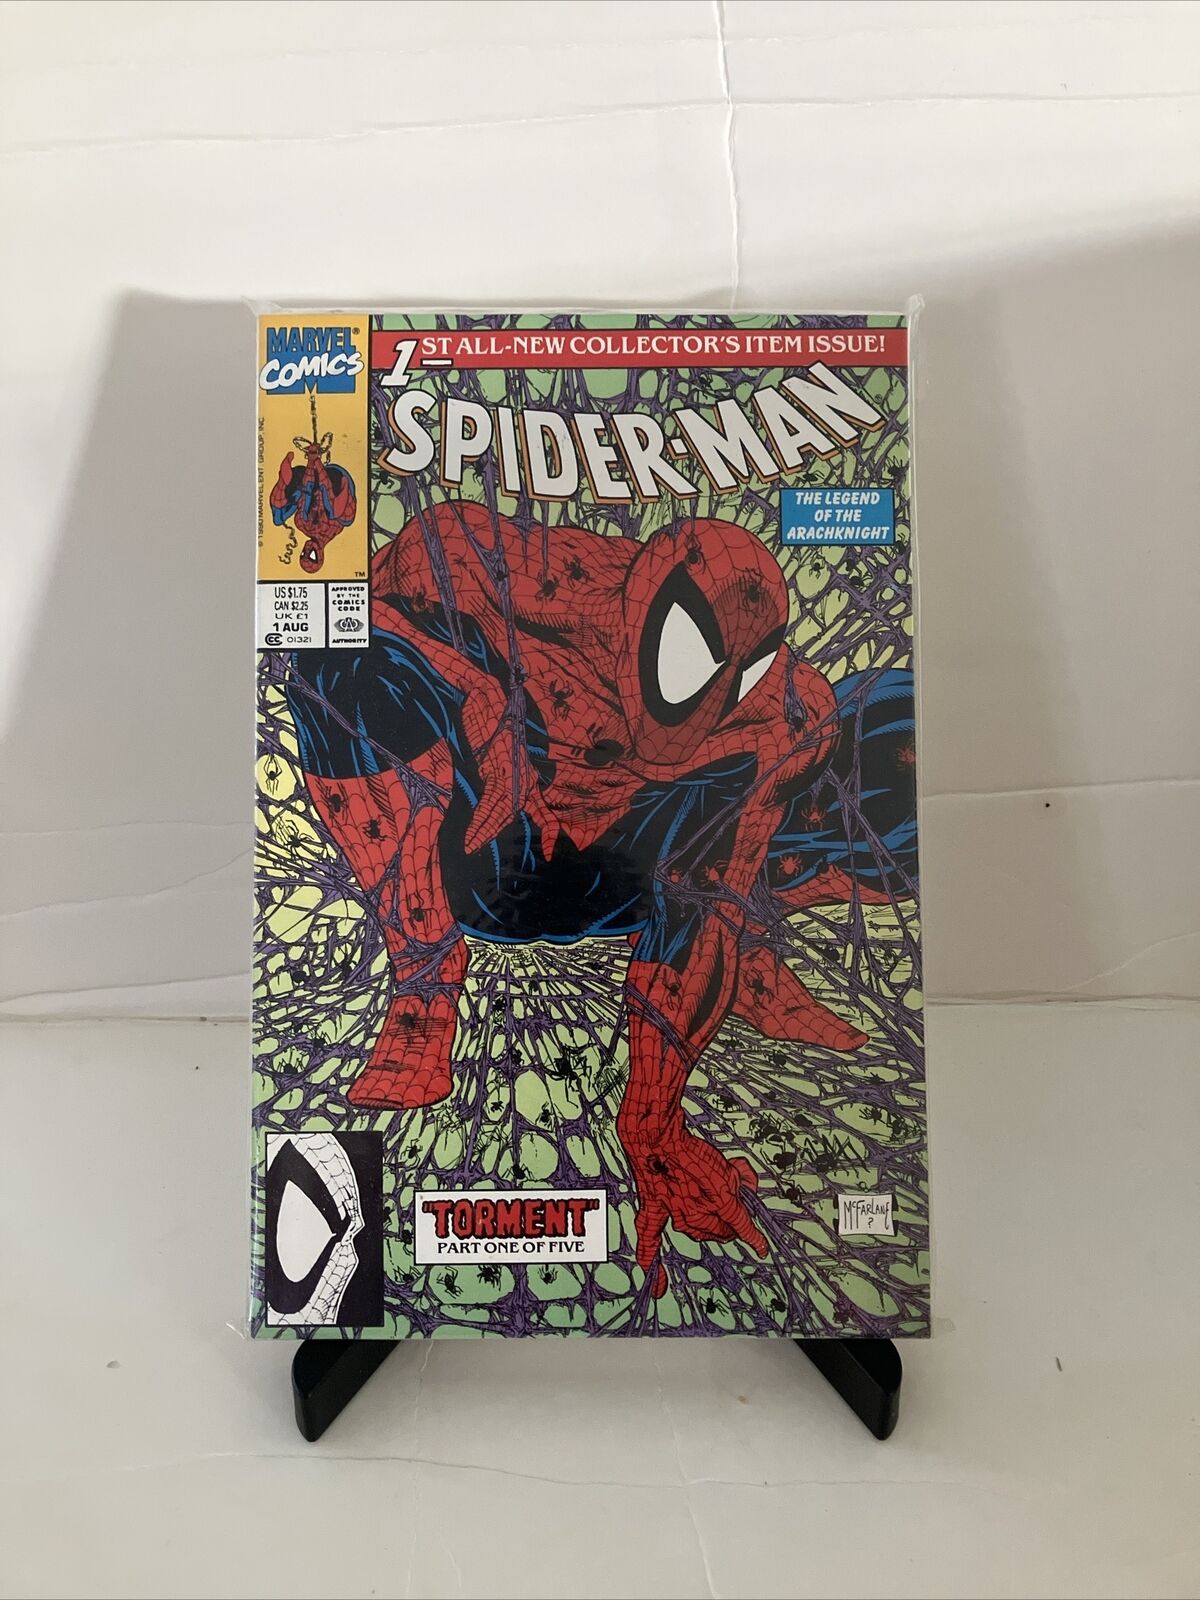 Spider-Man #1 Green Cover McFarlane Marvel, August 1990 Torment Part 1 Of 5